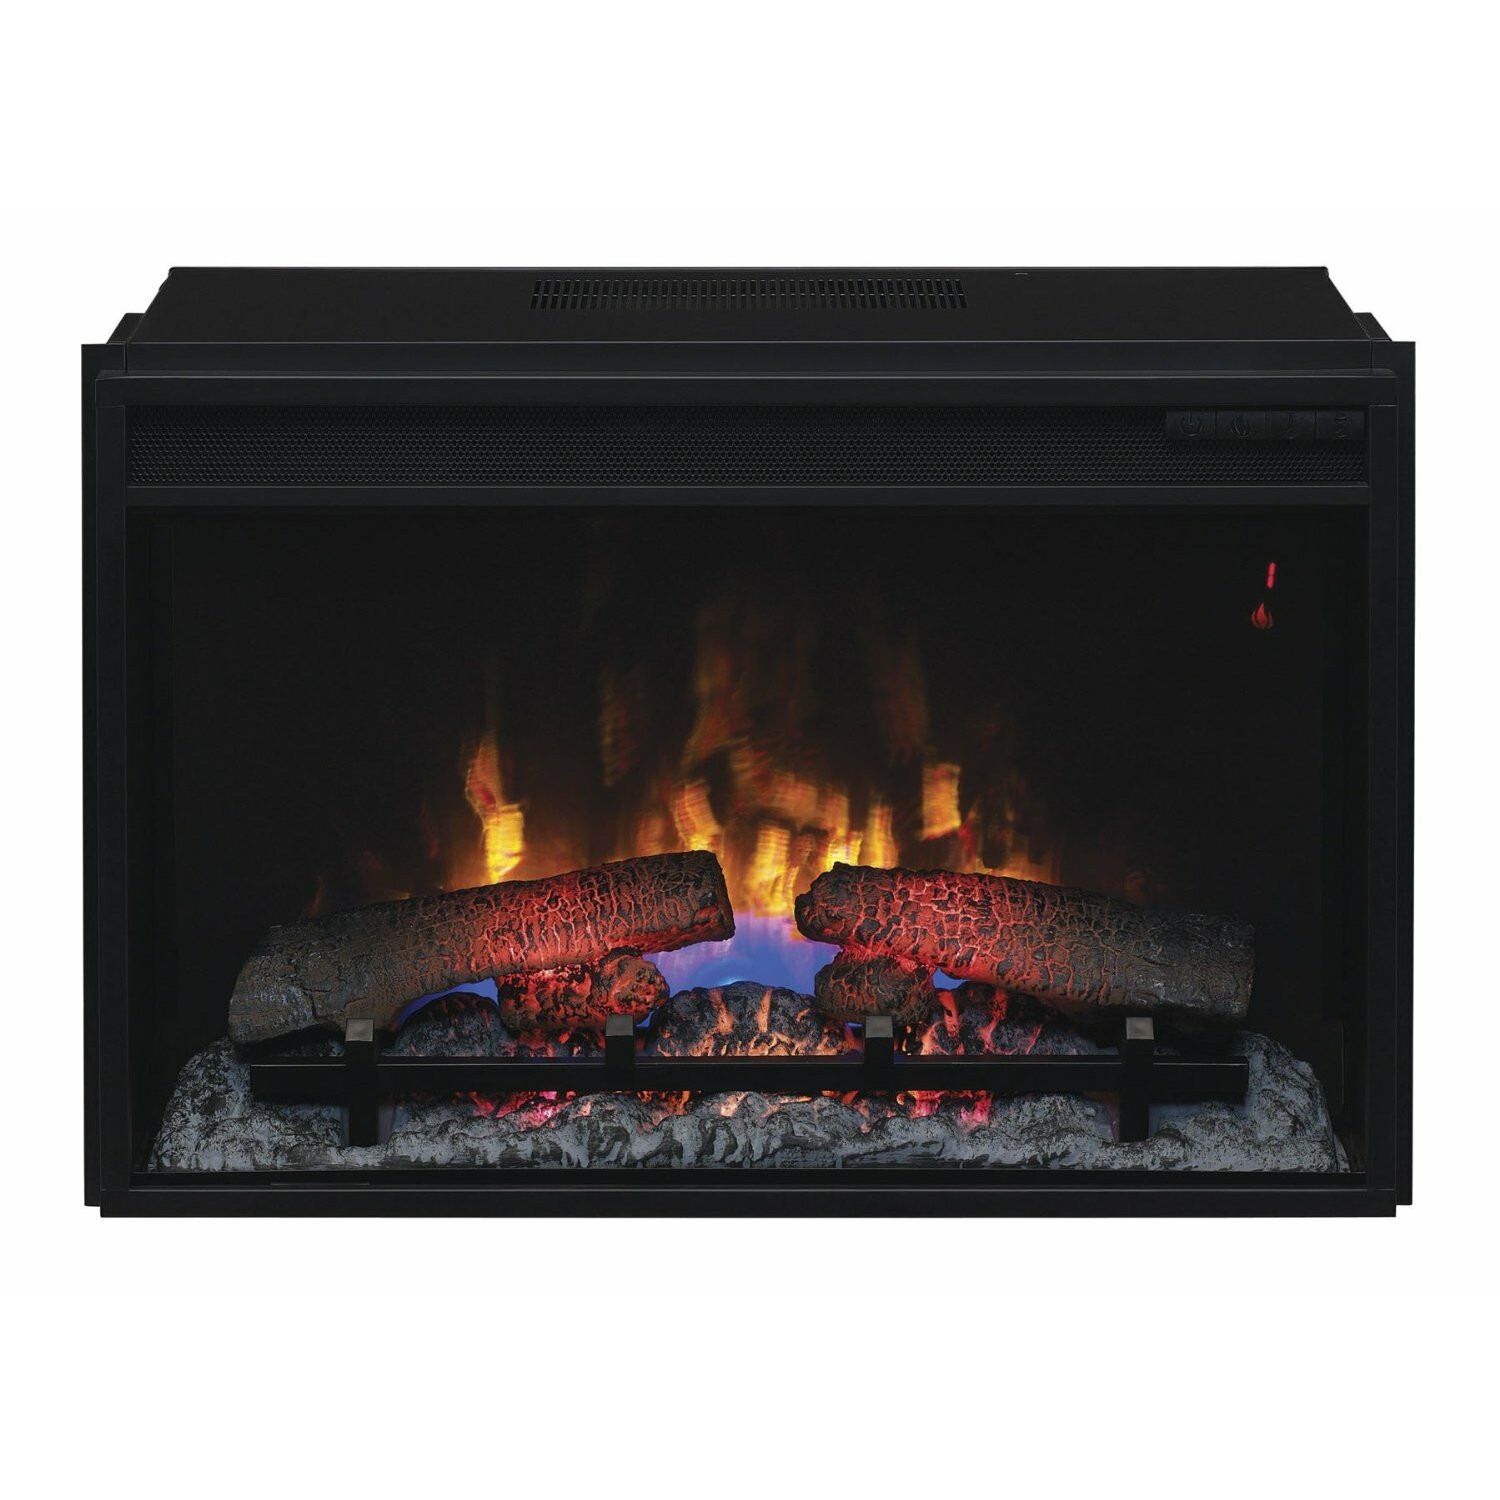 Classic Flame Electric Fireplace Insert
 Classic Flame 26" Infrared Electric Fireplace Insert